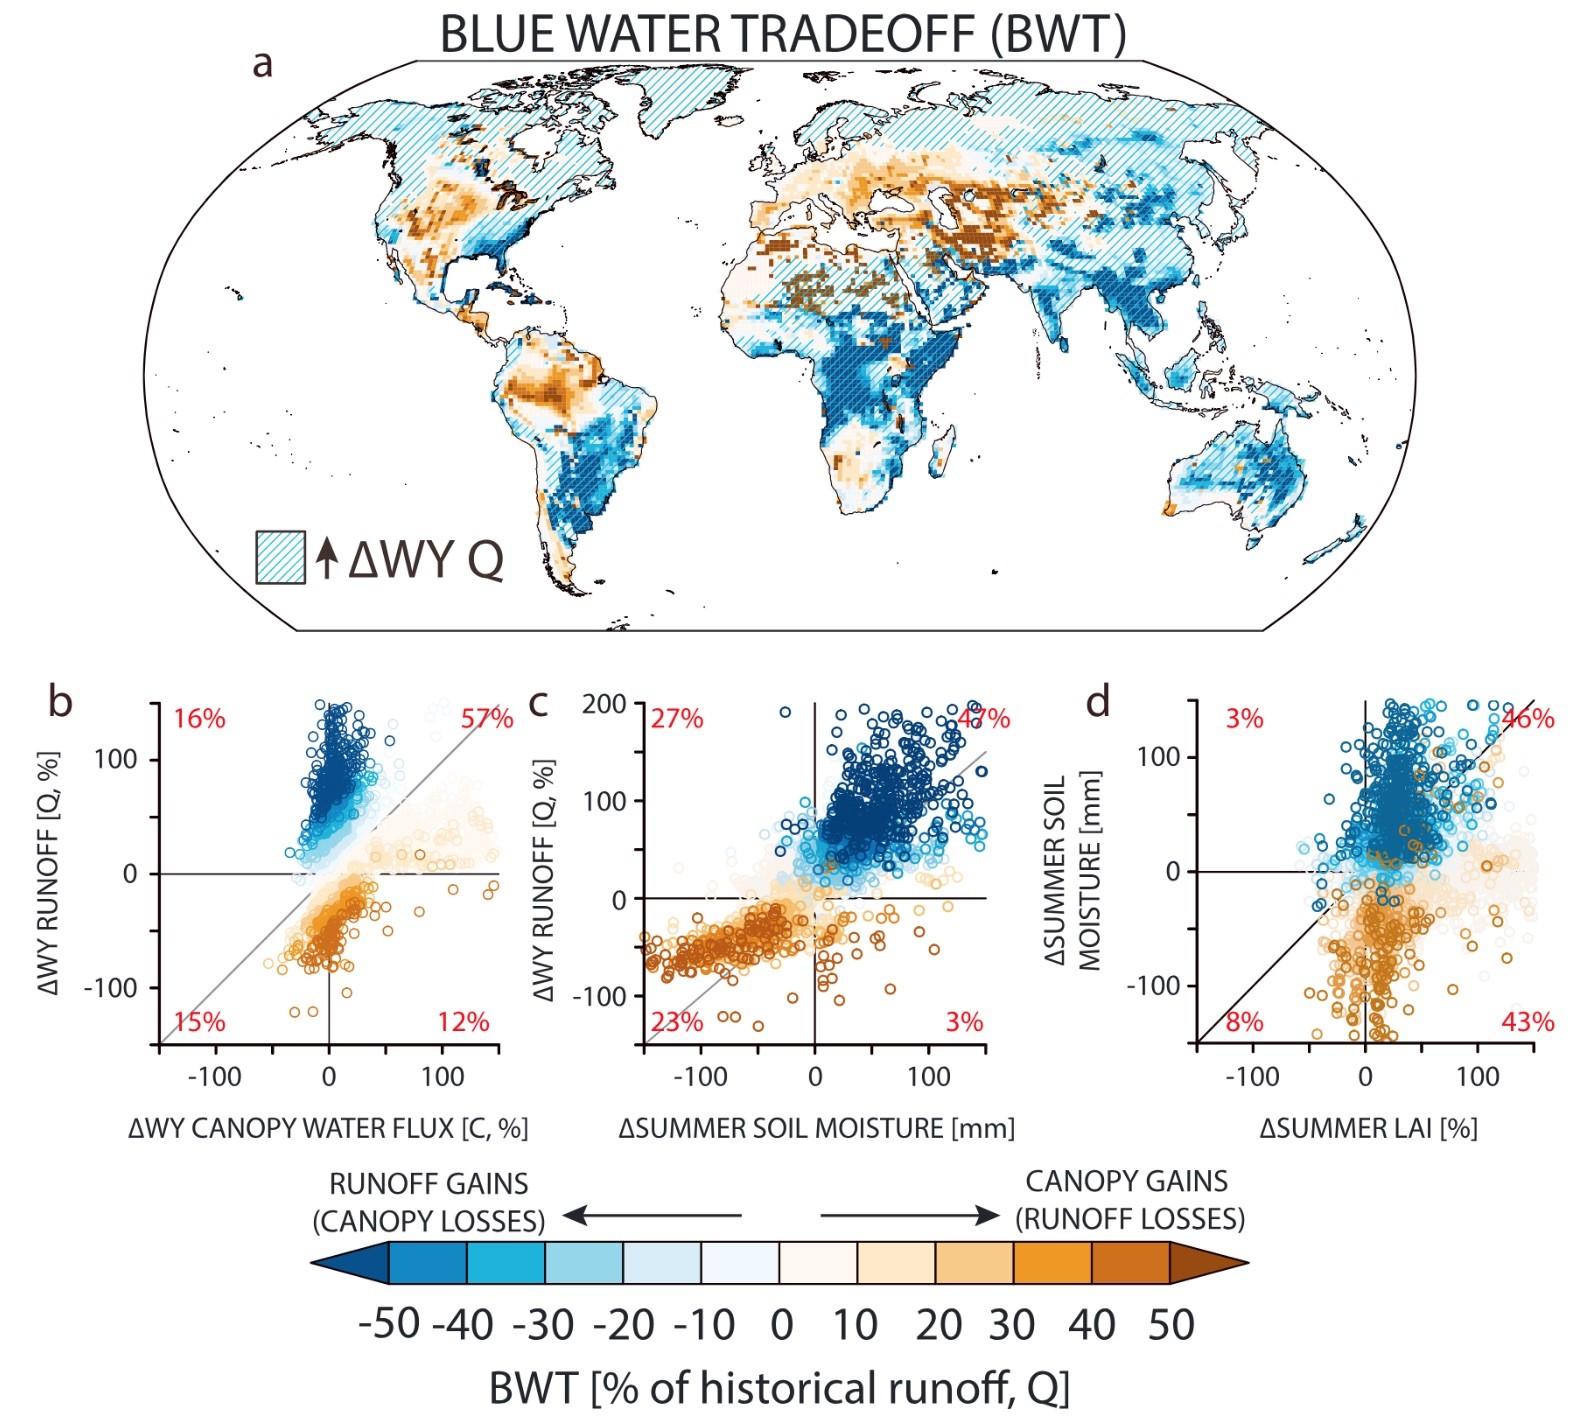 Blue water trade-off metric shown globally